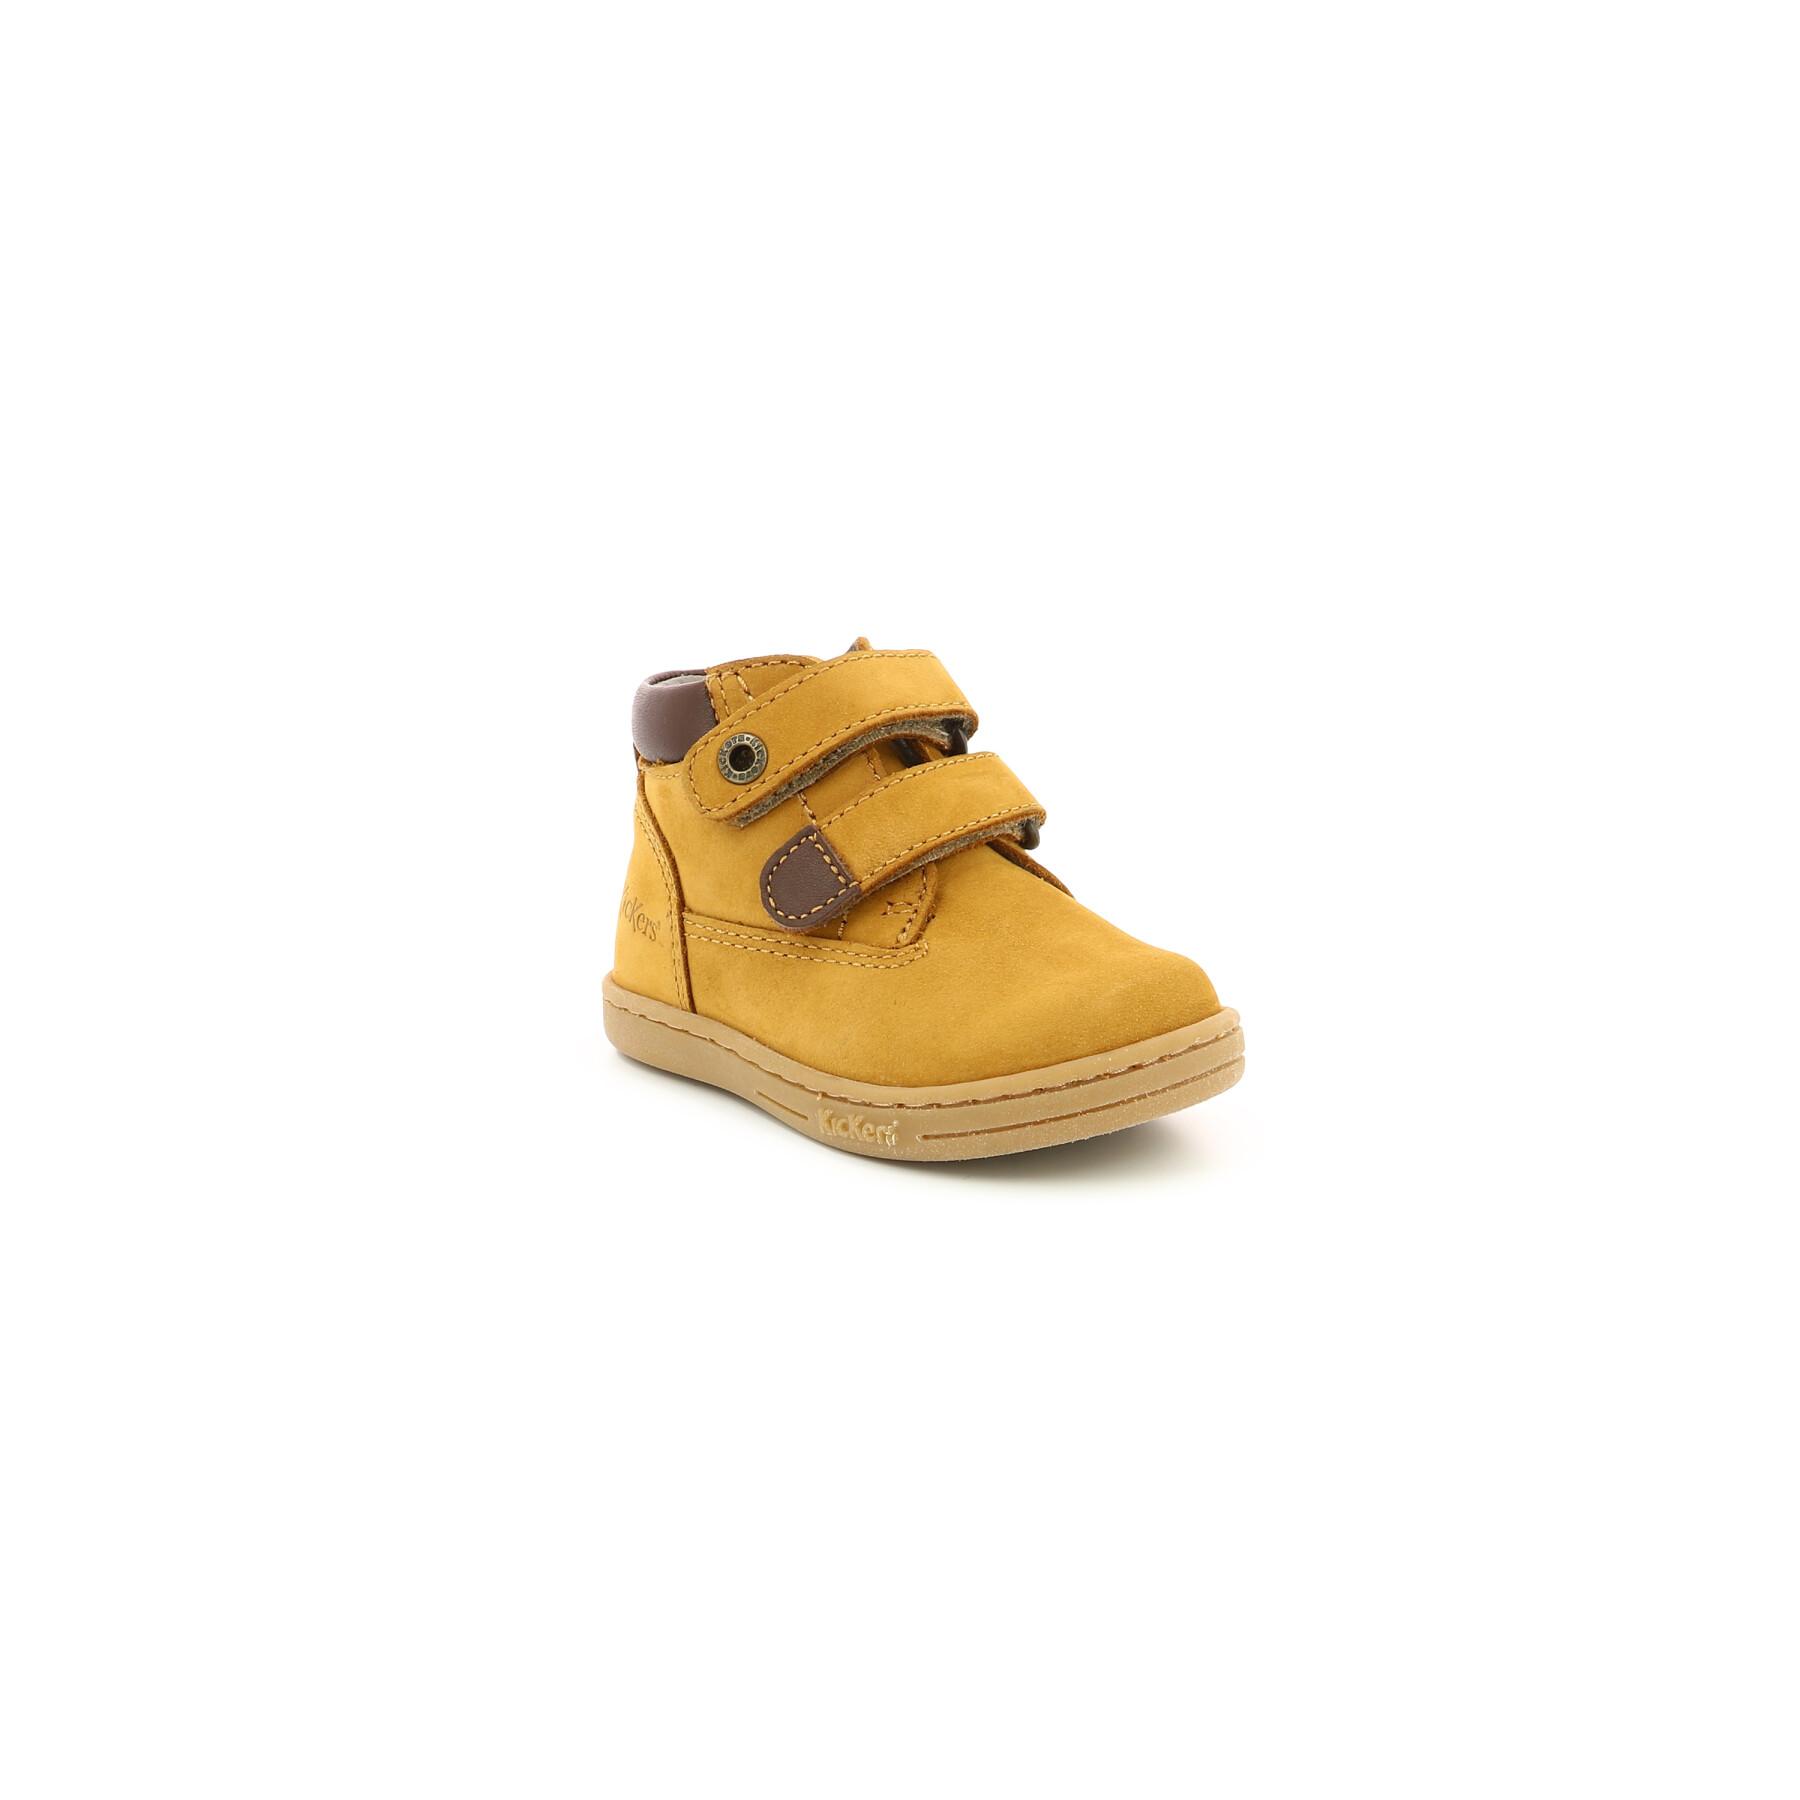 Children's shoes Kickers Tackeasy